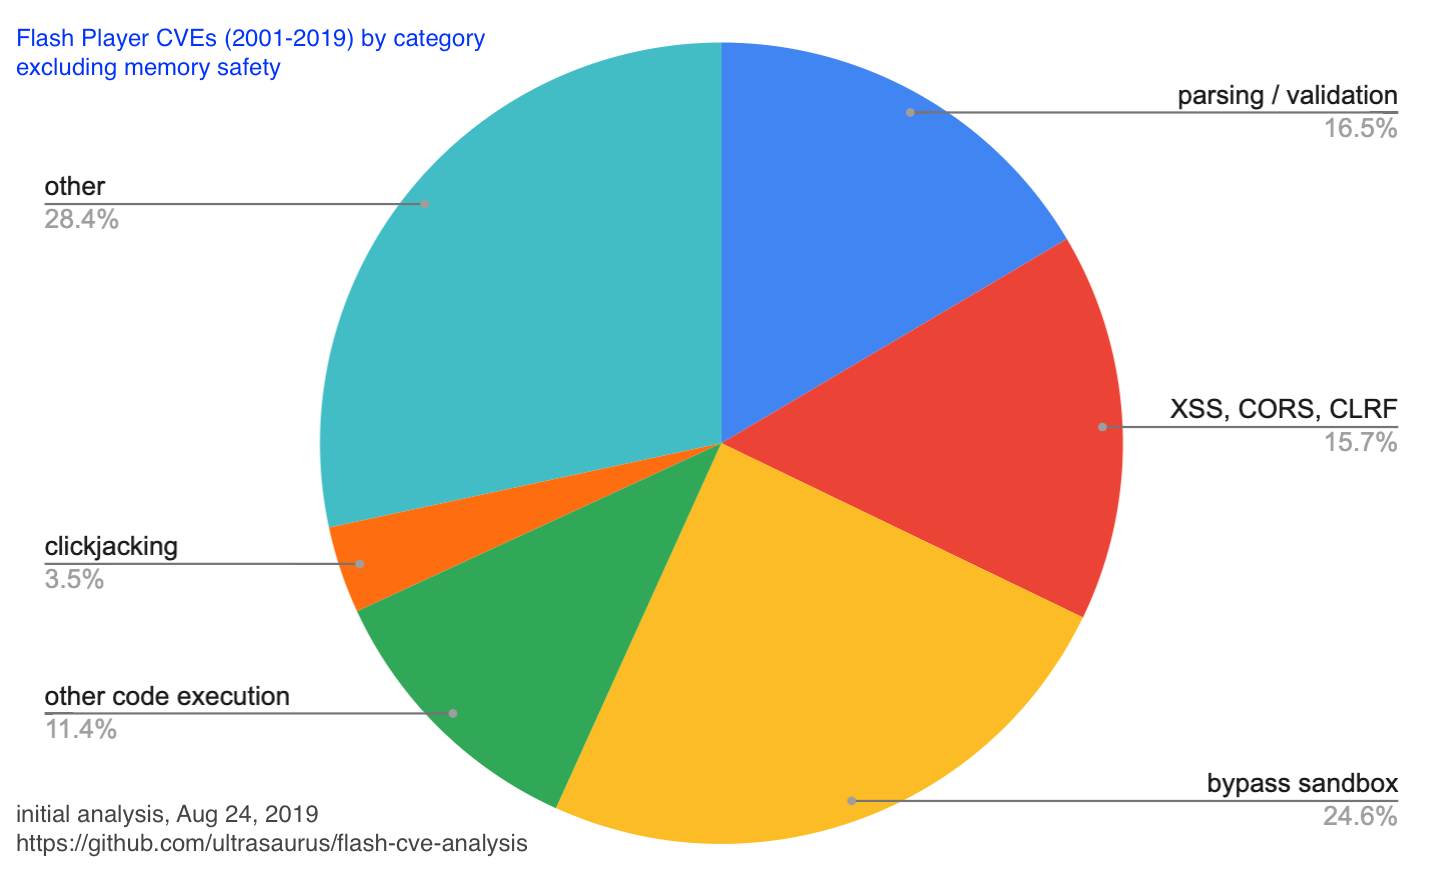 pie chart excluding memory safety shows 16% parsing / validation